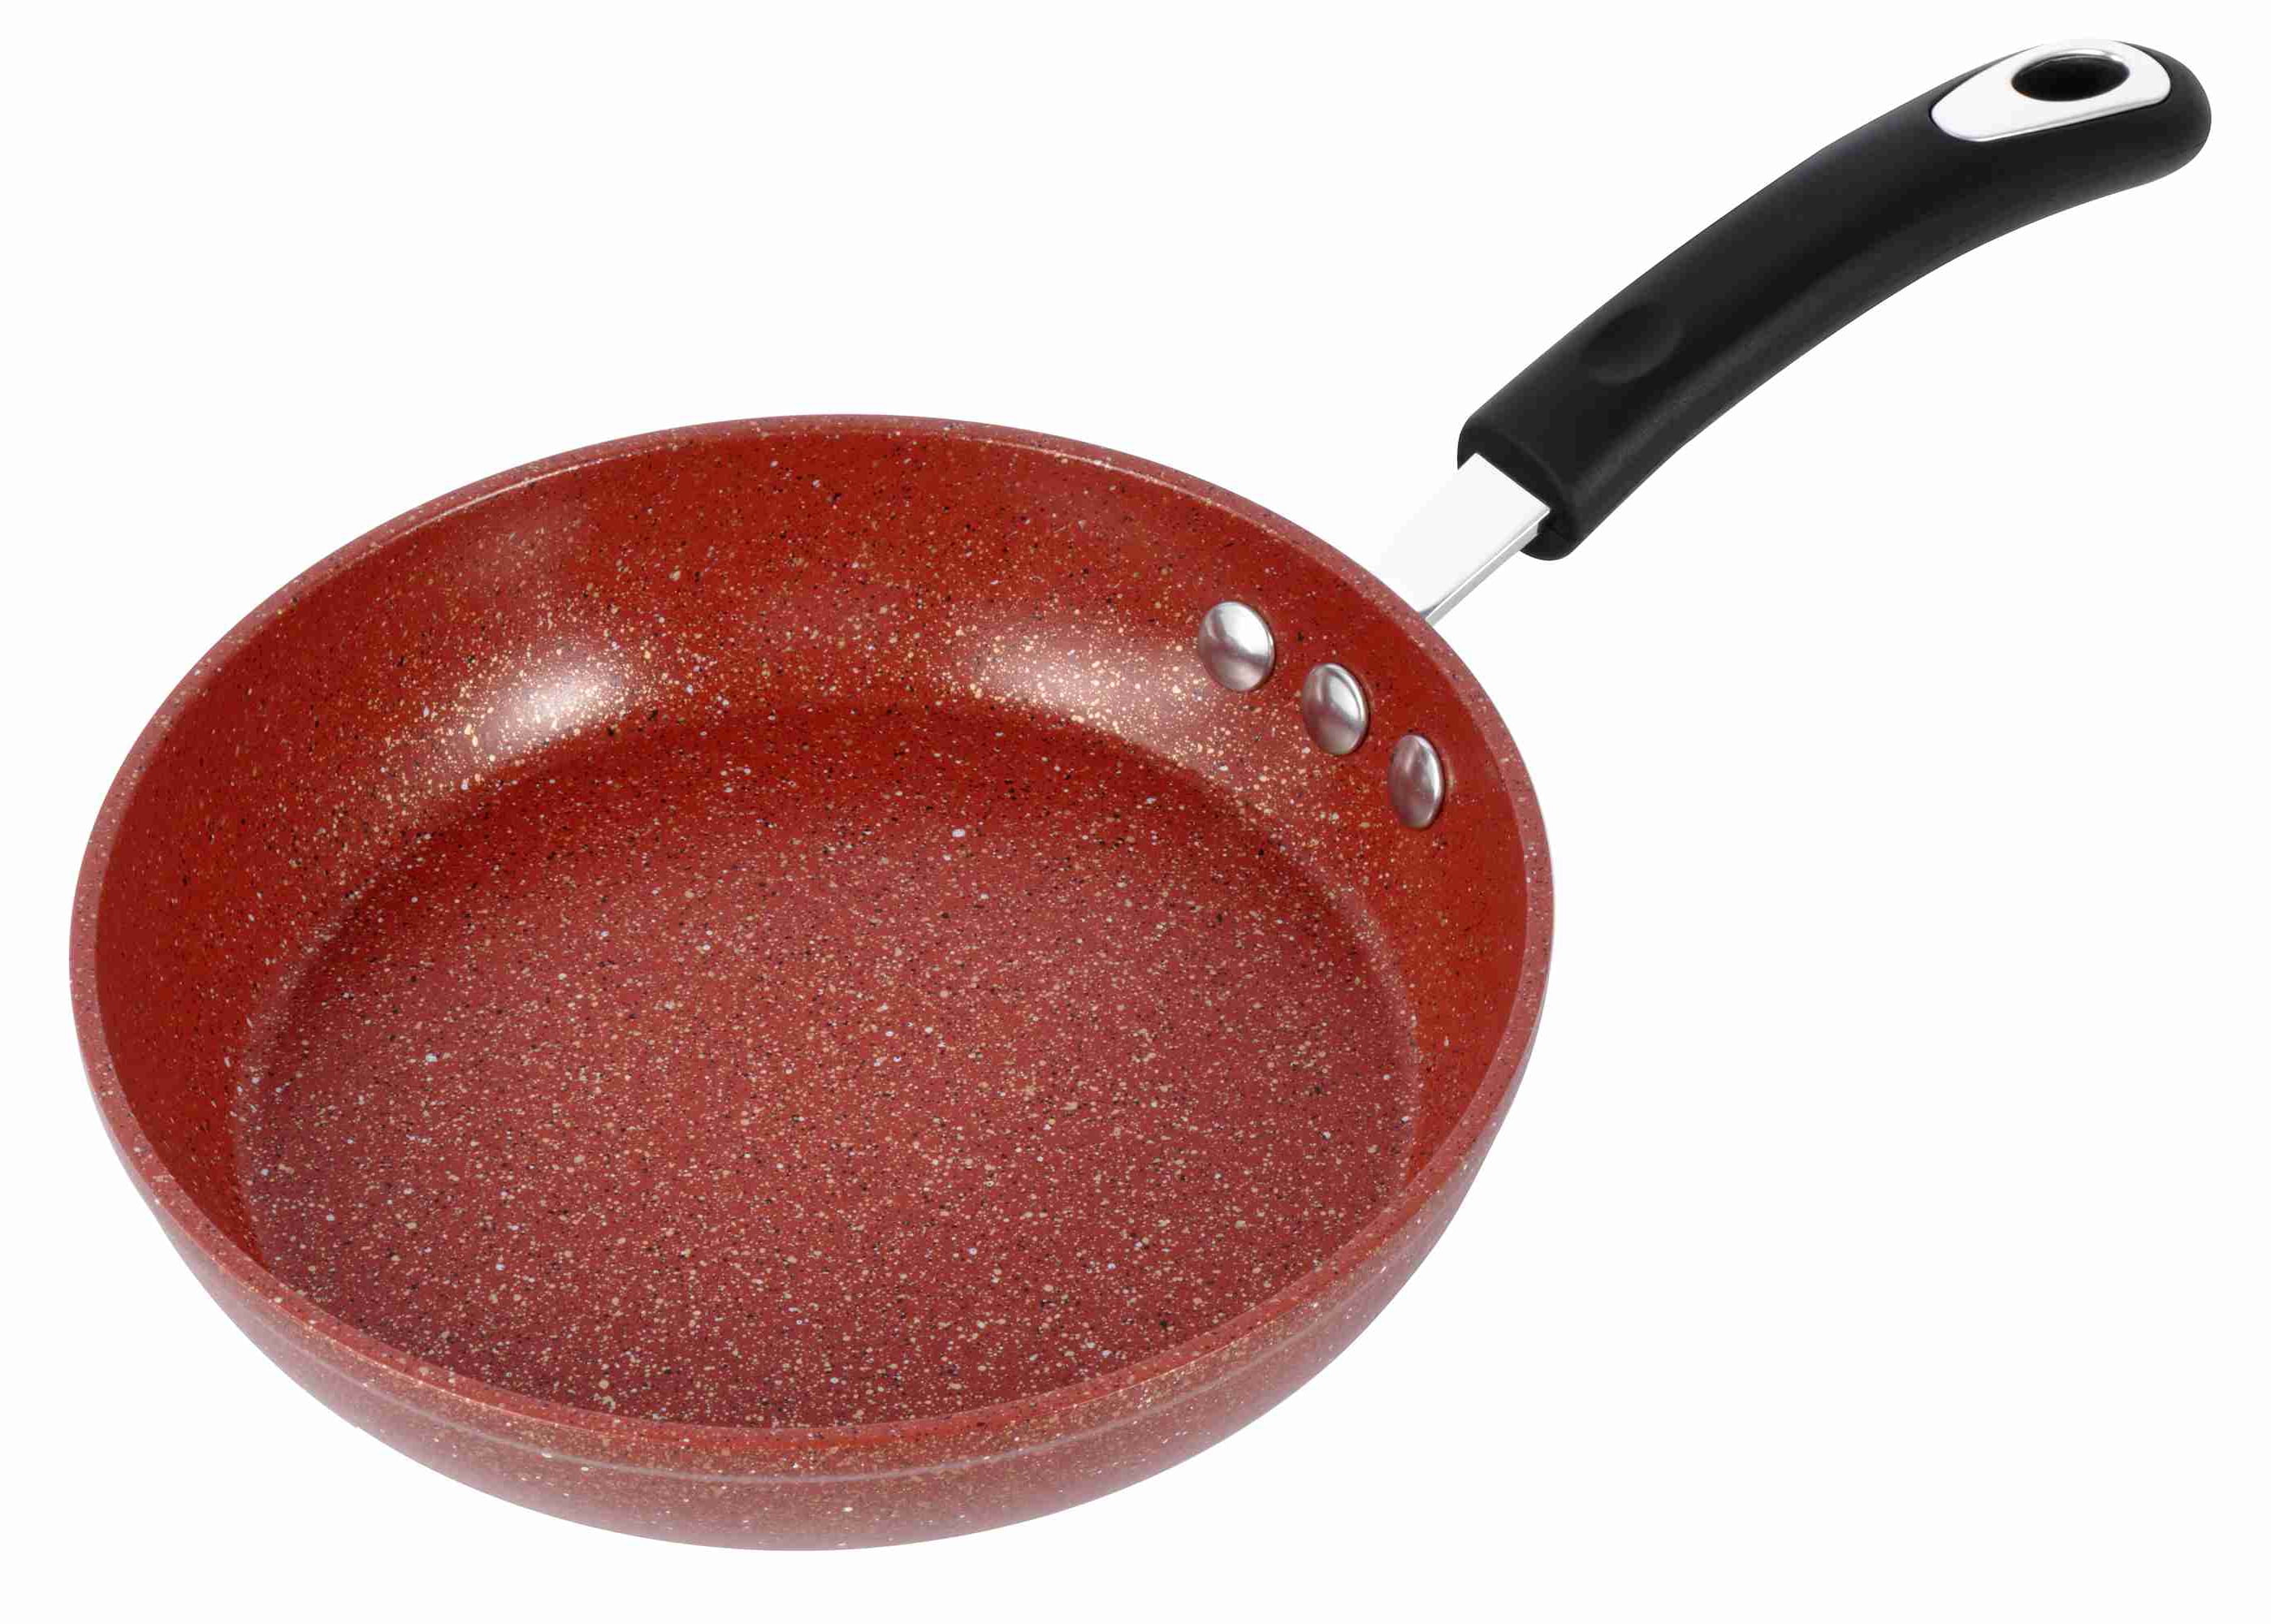 Ozeri 12 Stone Earth Frying Pan with APEO-Free Non-Stick Coating - Macy's